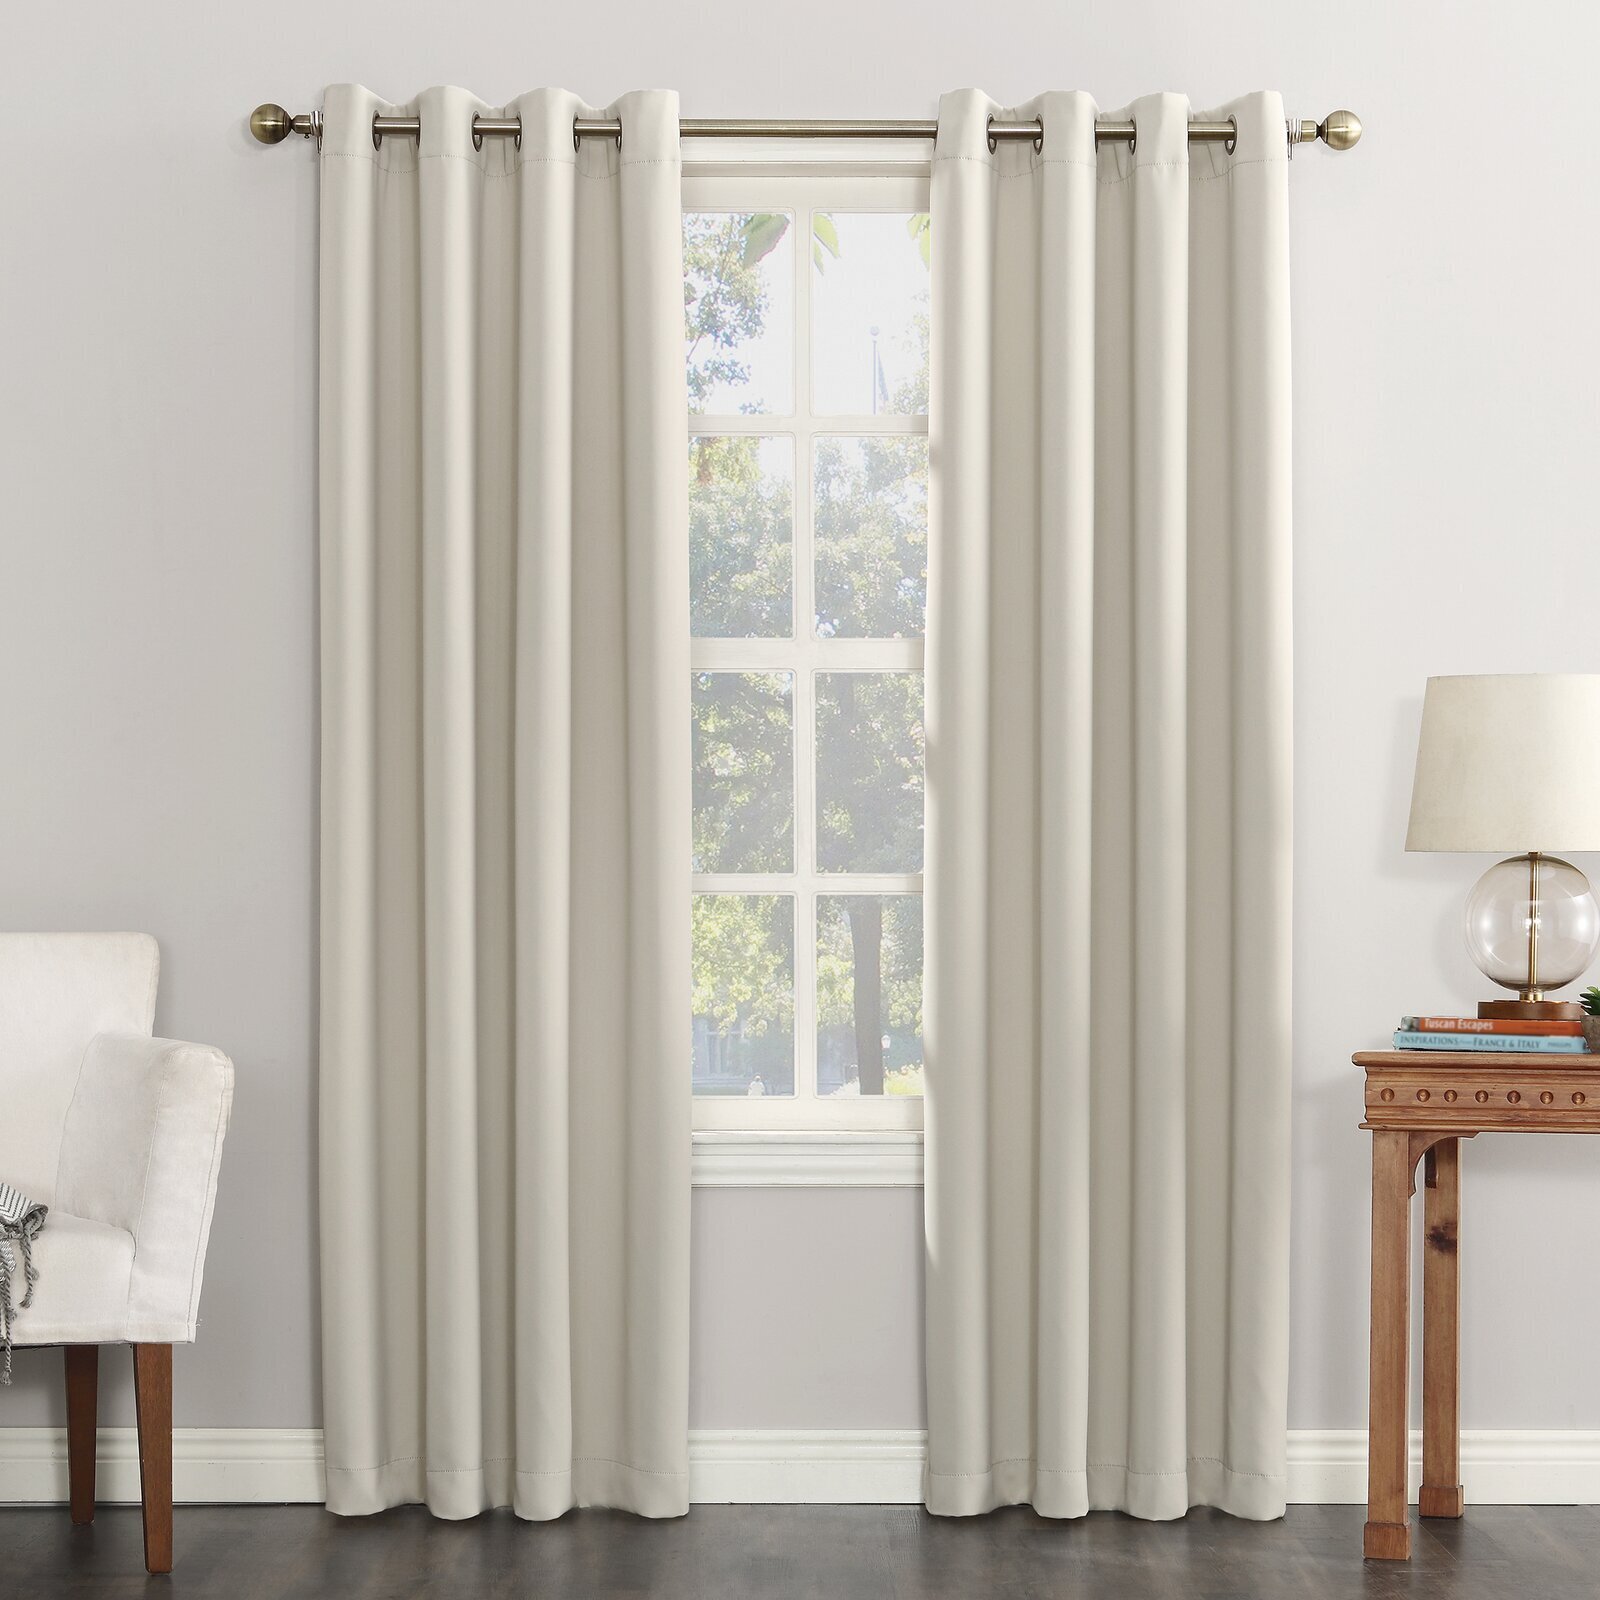 Noise Reducing Curtain Panel With Grommet Header